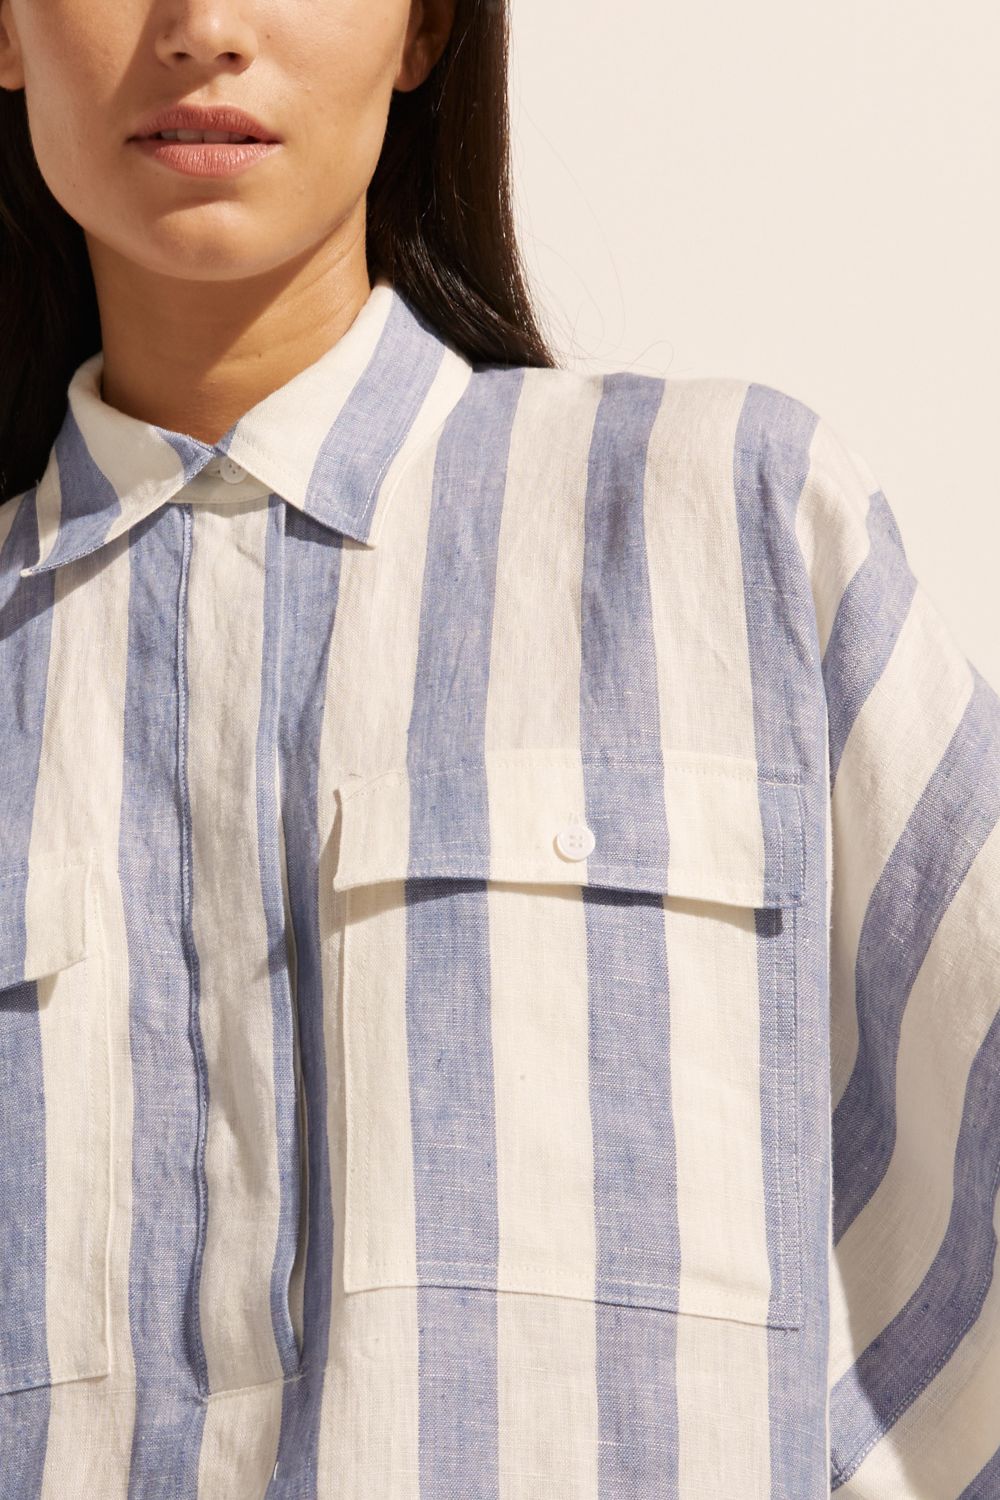 blue and white stripe, shirt, oversized pockets, short sleeve, linen, close up view